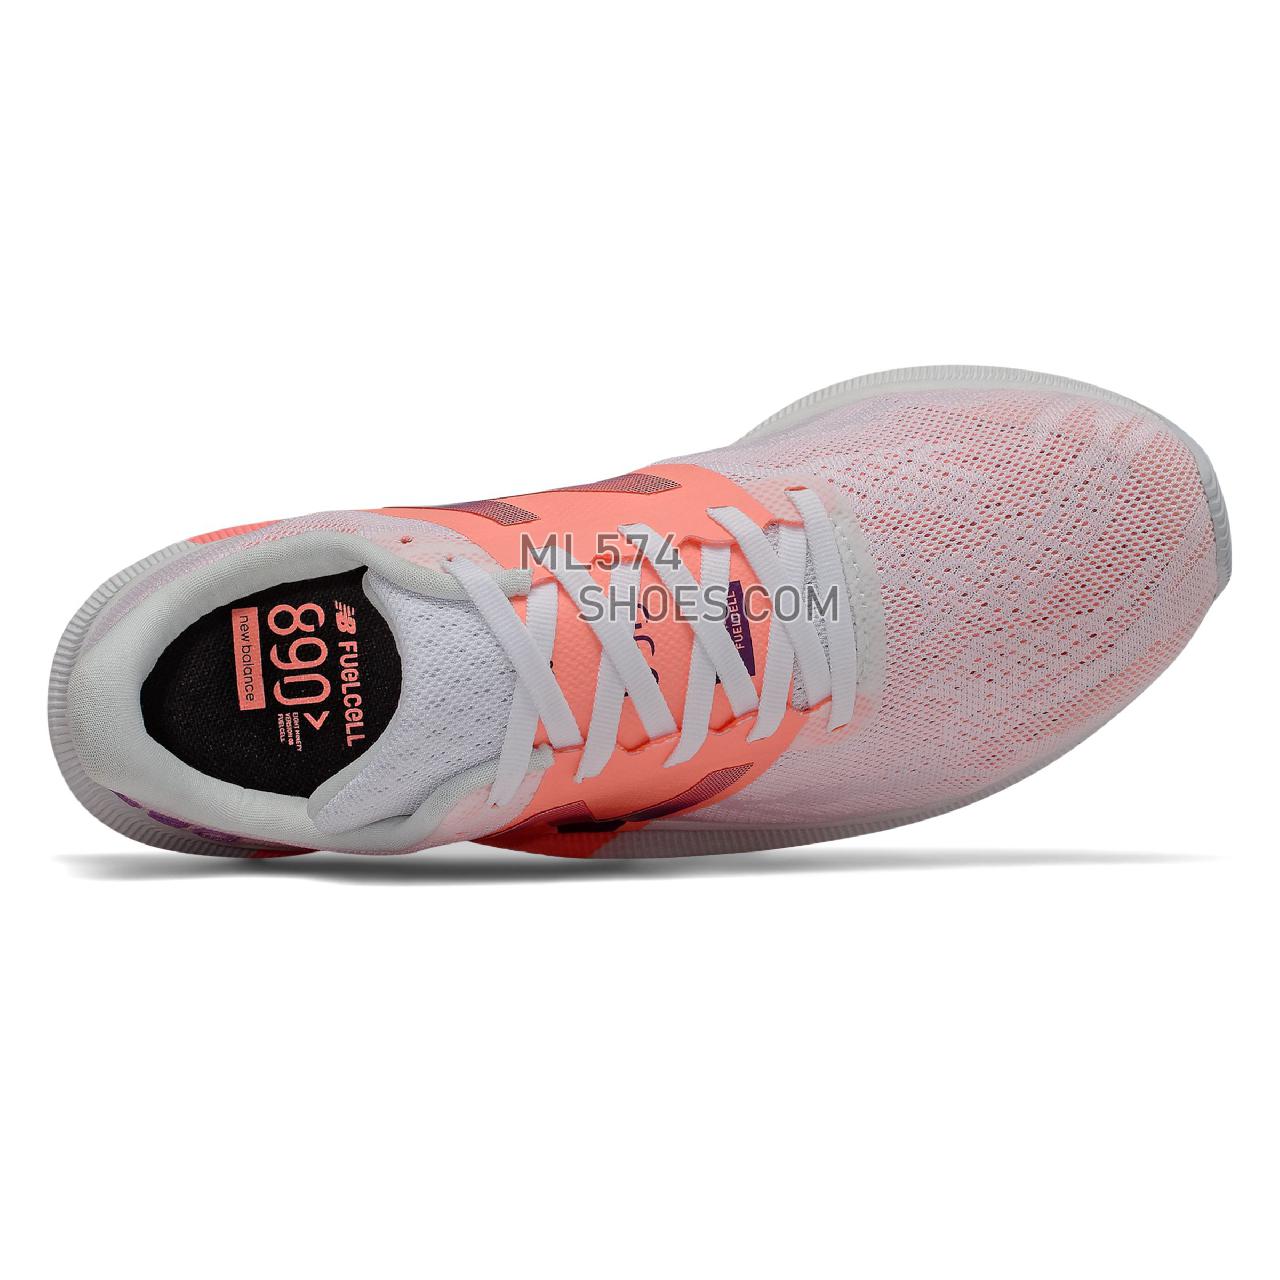 New Balance FuelCell 890v8 - Women's 800 Series - Moon Dust with Ginger Pink and Plum - W890SP8